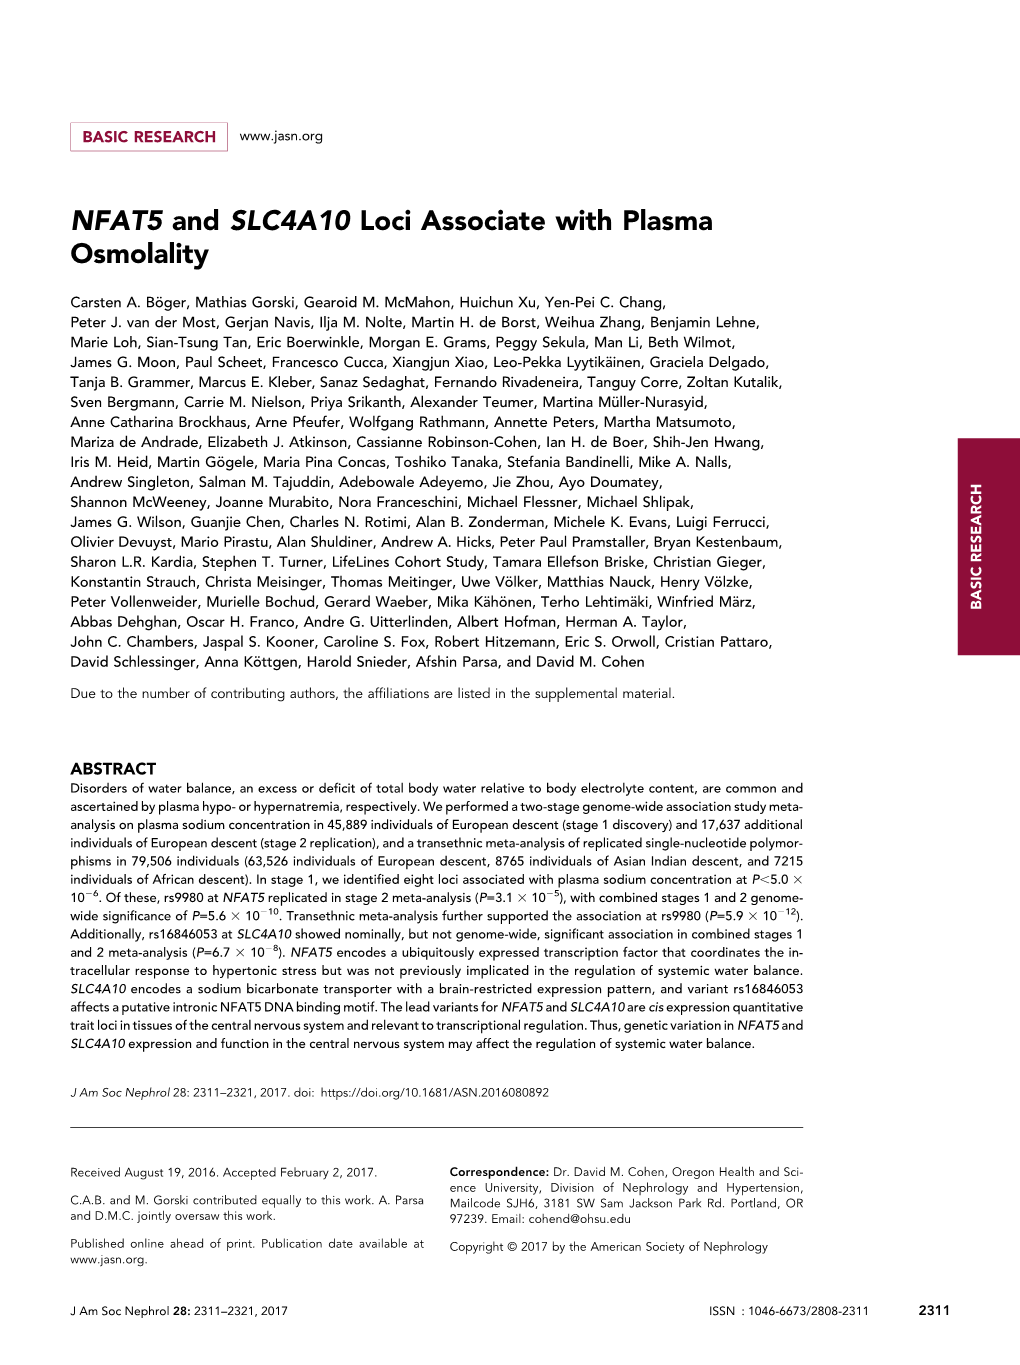 NFAT5 and SLC4A10 Loci Associate with Plasma Osmolality